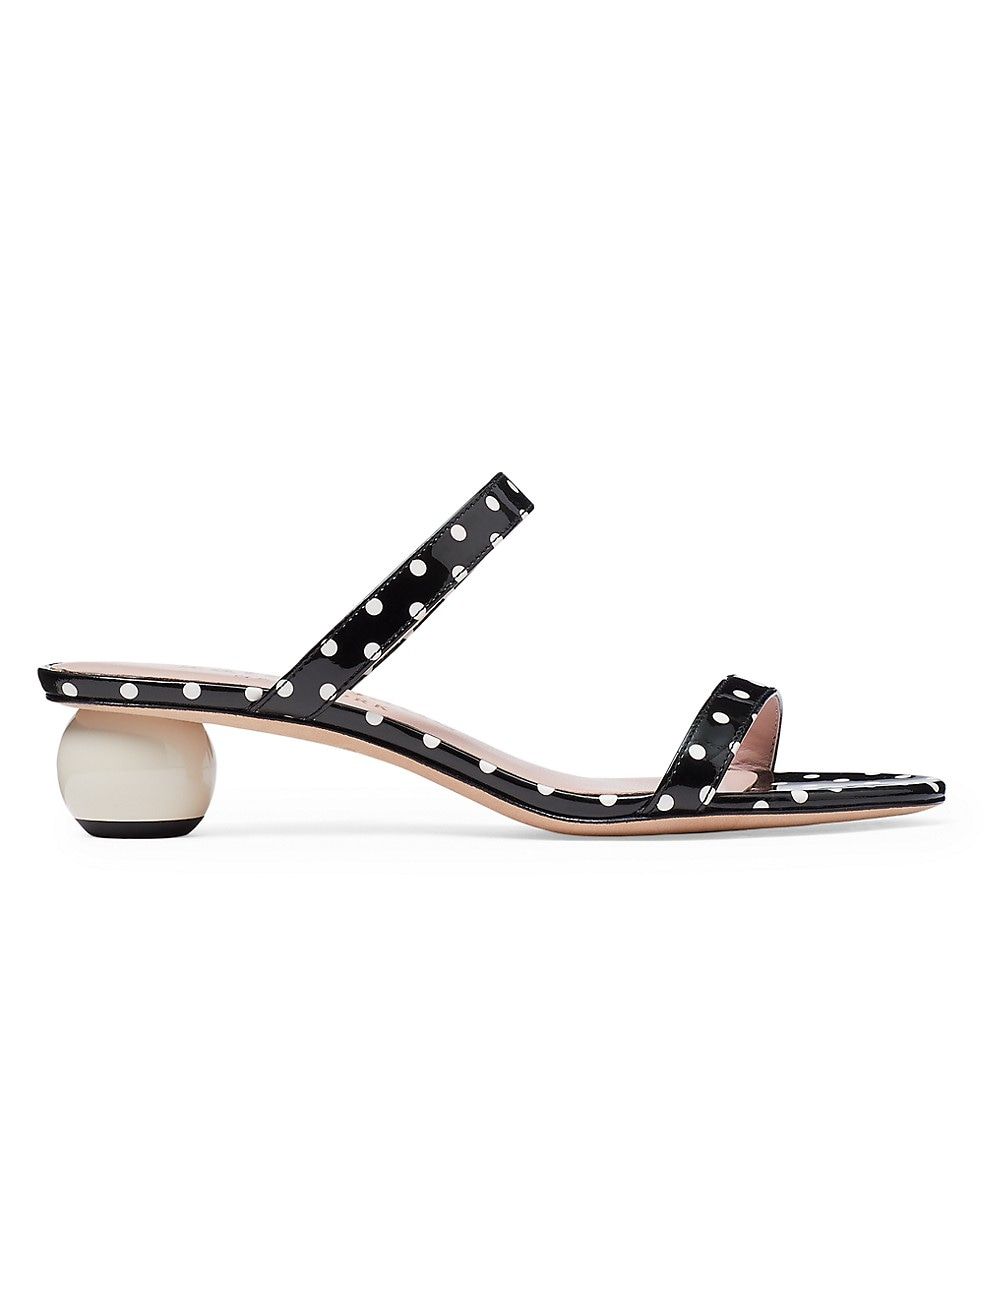 Palm Springs Polka Dot Leather Sandals | Saks Fifth Avenue